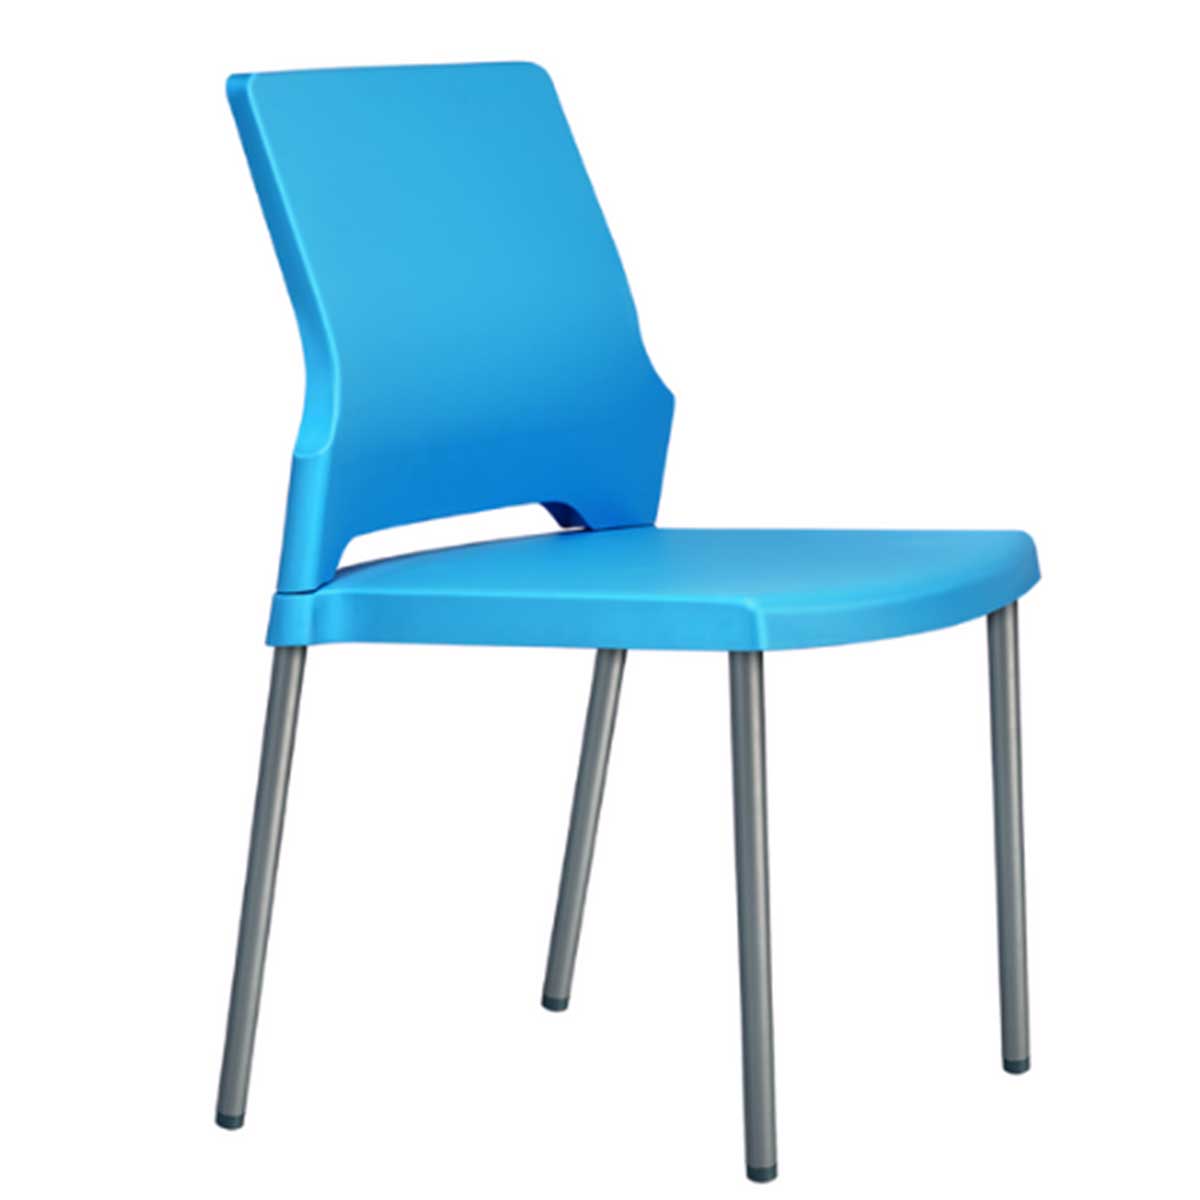 Cafeteria Chair Manufacturers, Suppliers in Paschim Vihar